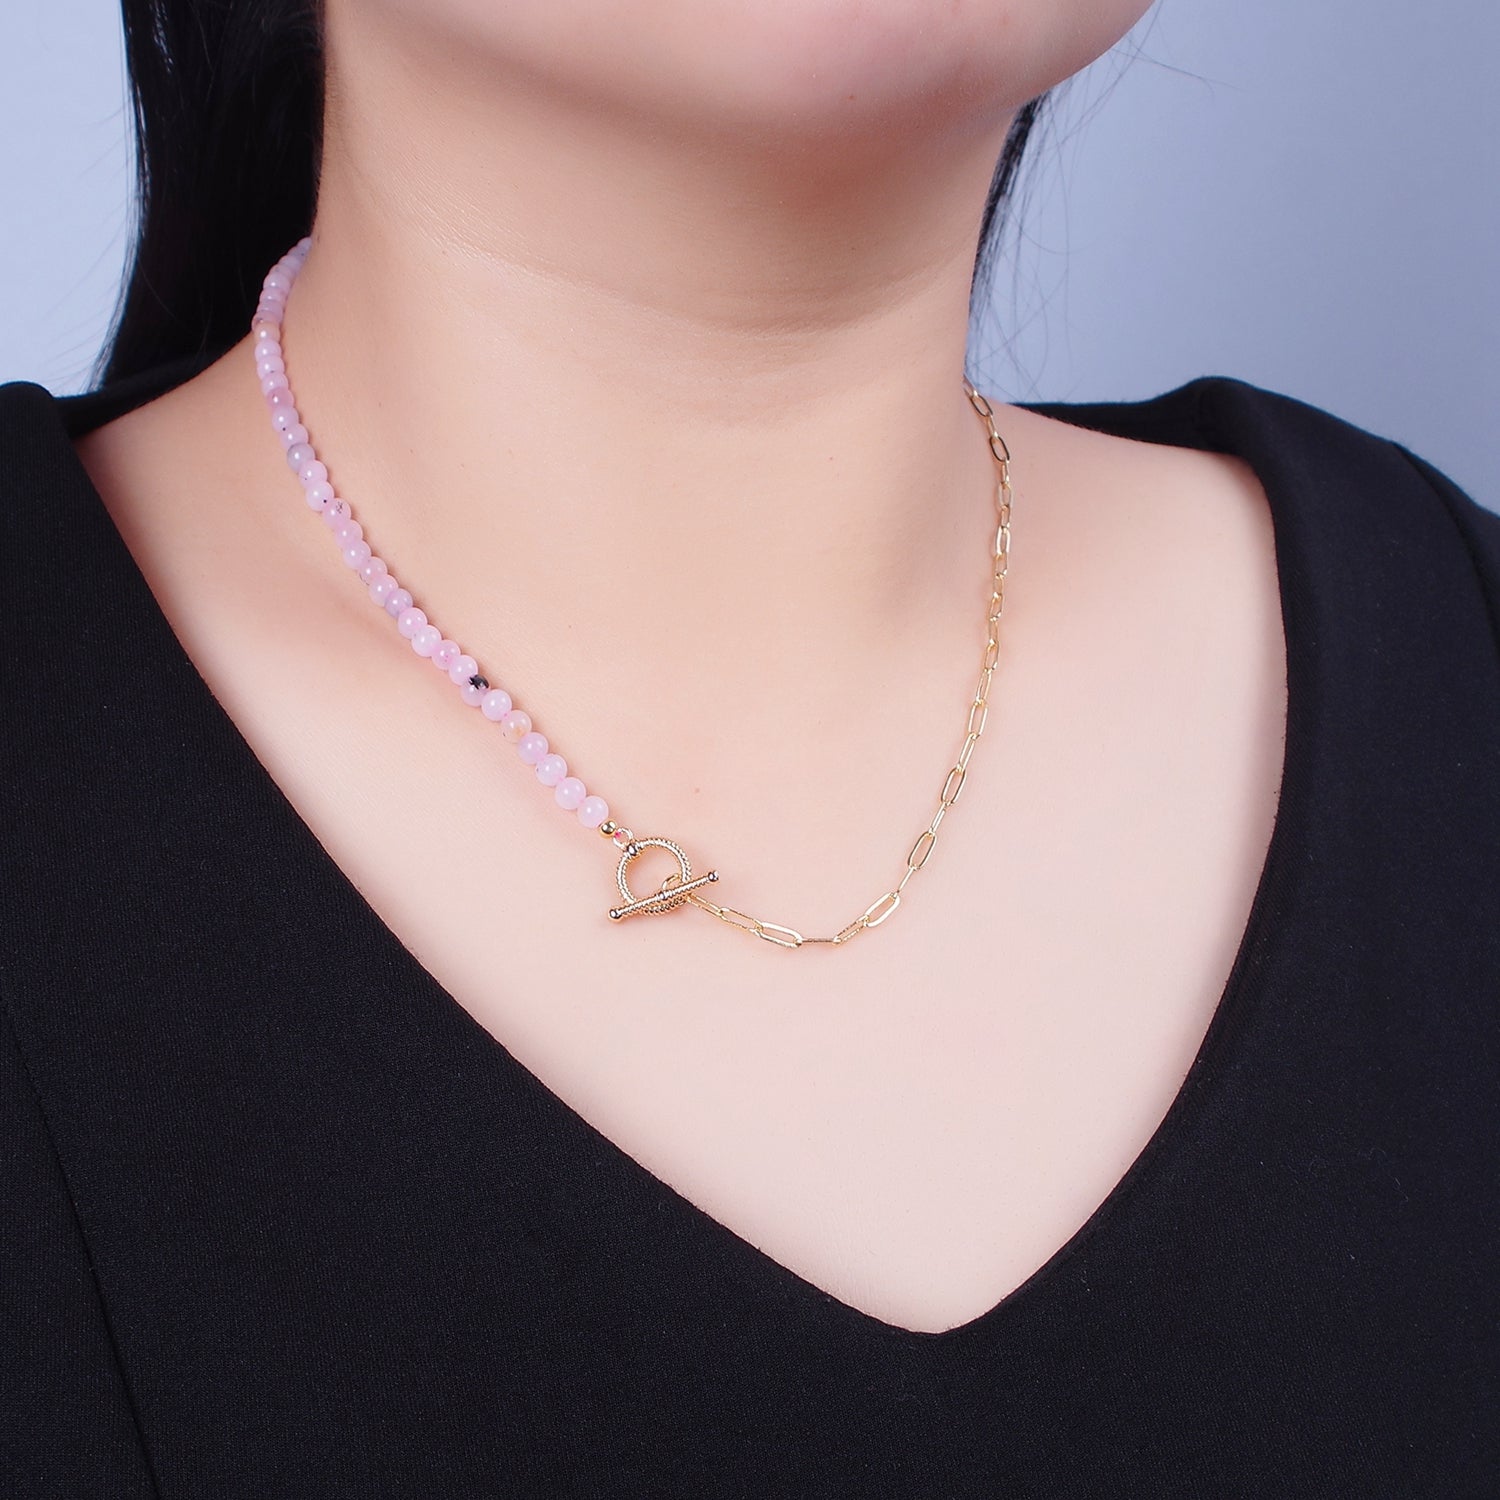 Dainty Half Bead Half Link Chain Necklace, 24k Gold Filled Paperclip Chain with Pink Jade Necklace Toggle Clasp WA-970 - DLUXCA